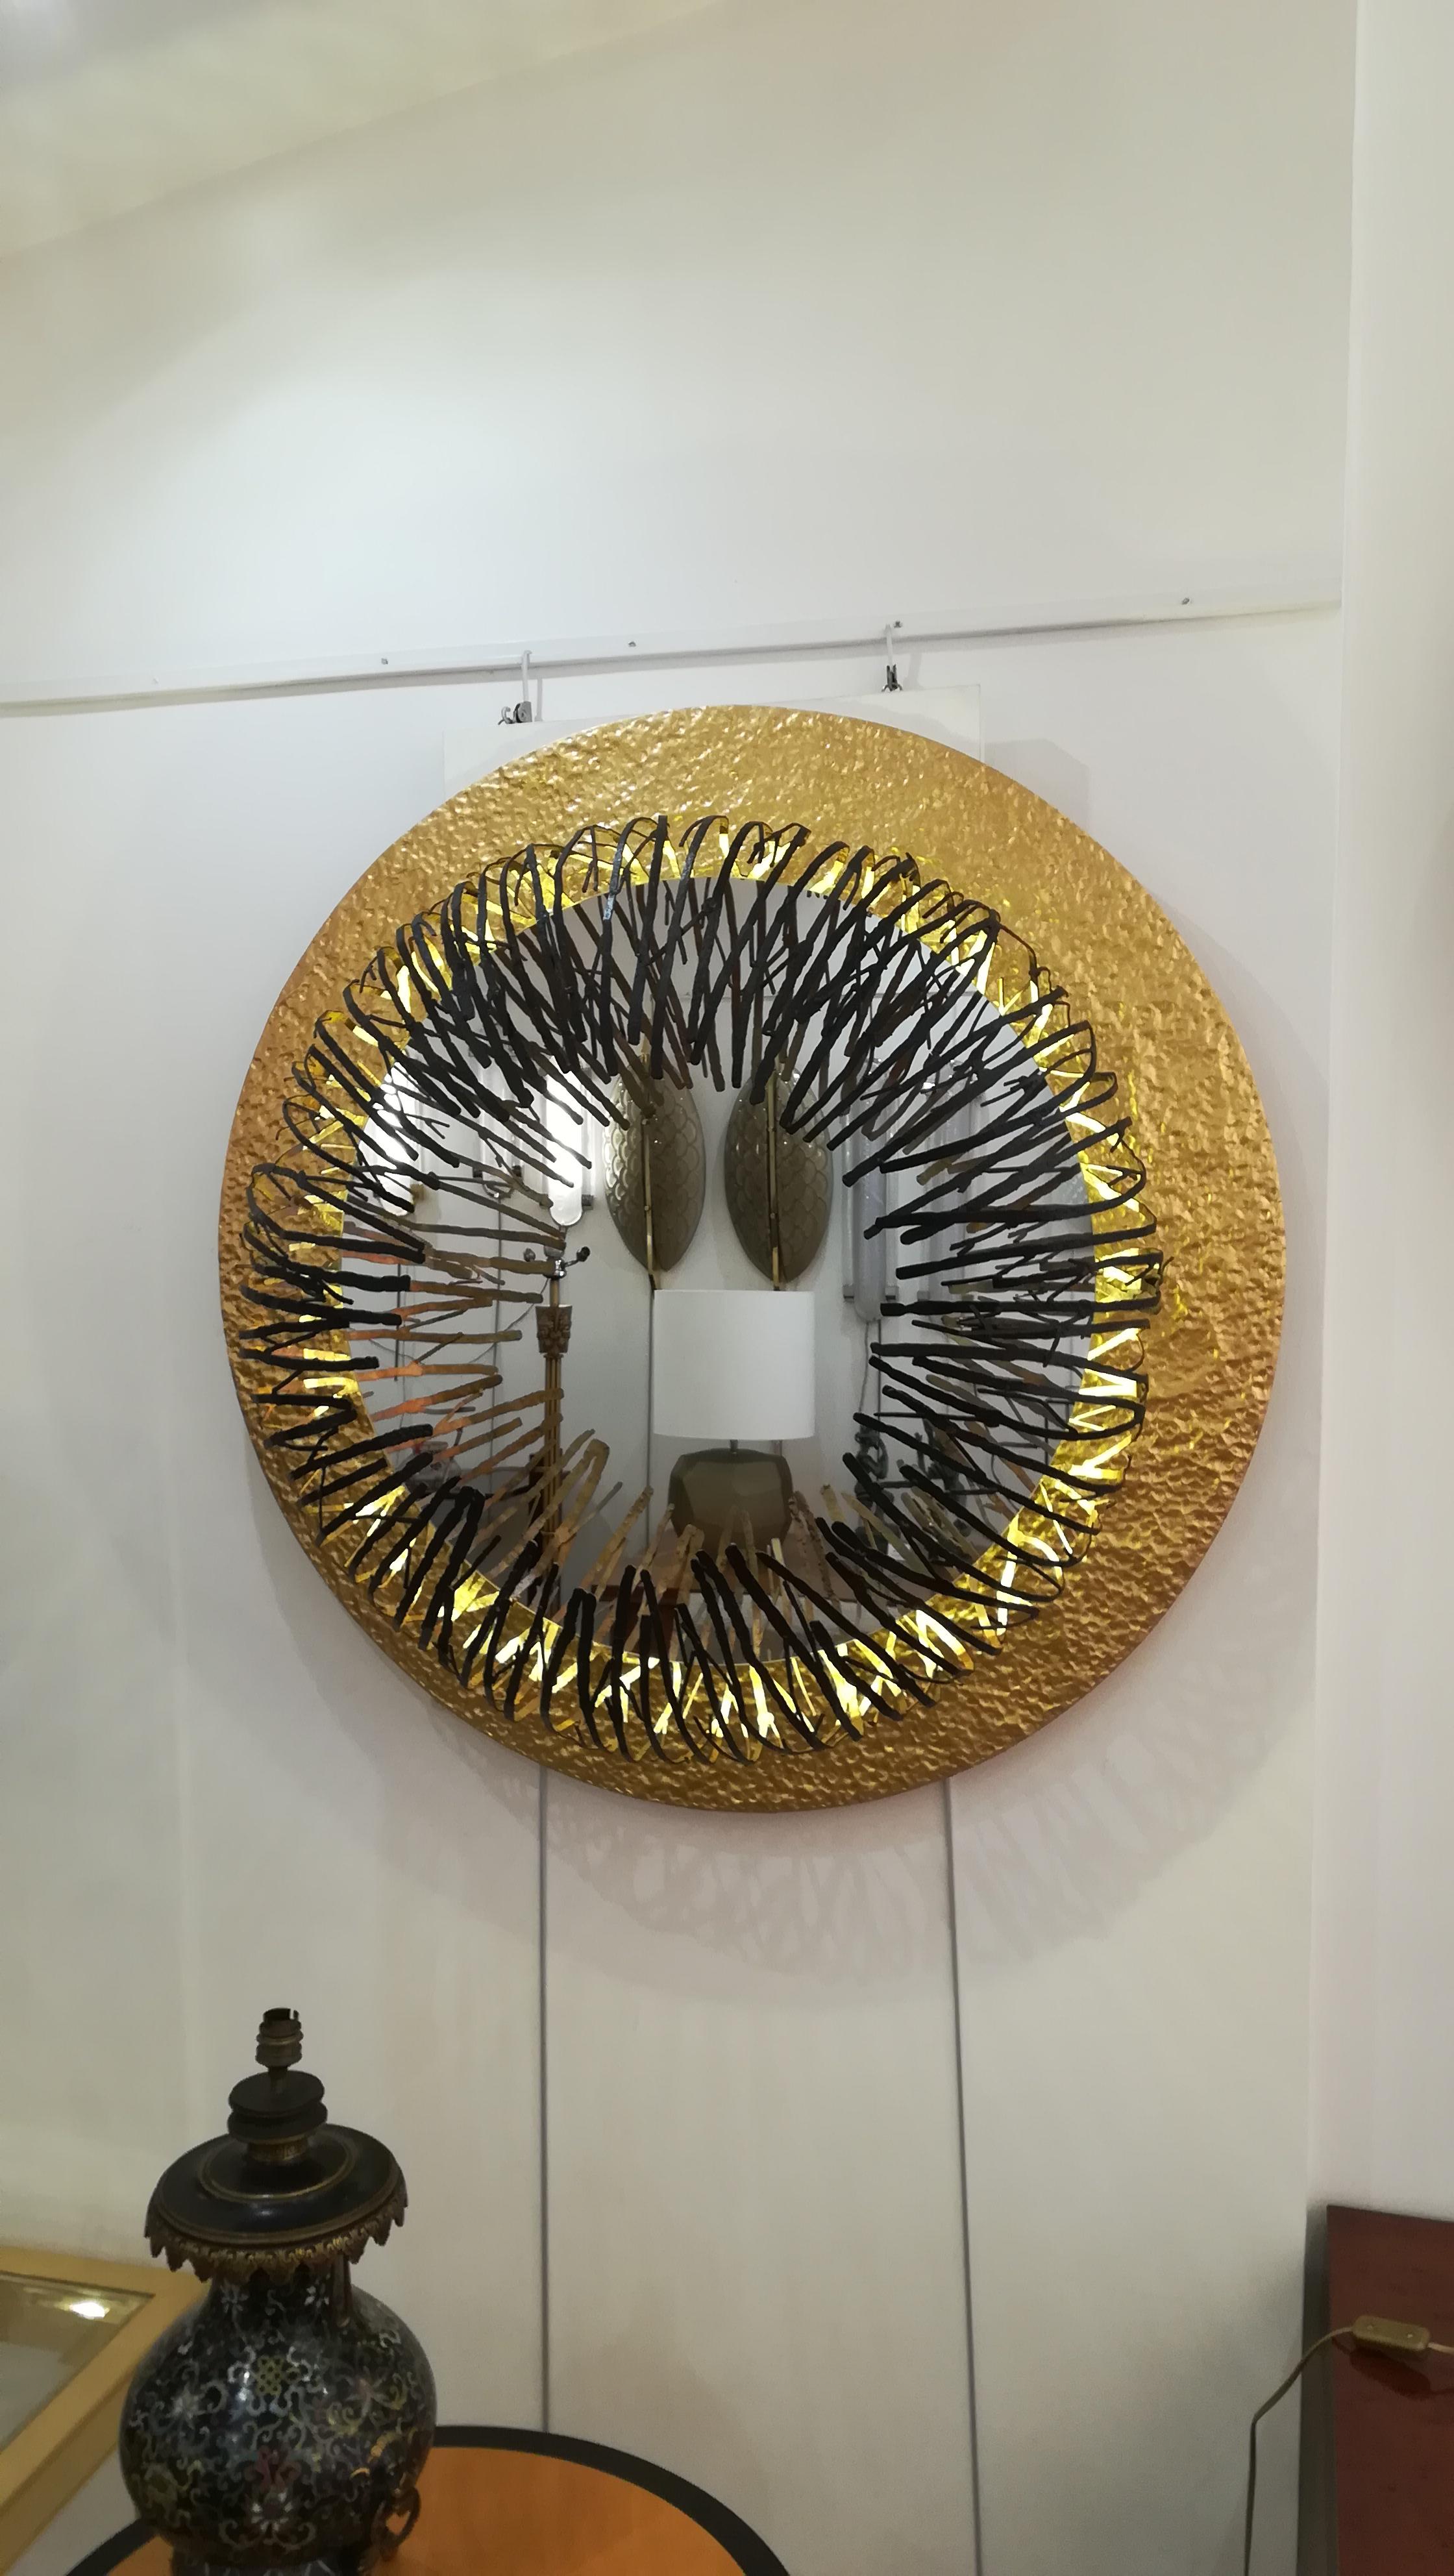 Bronze and patinated metal mirror illuminated by leds all around
Mirror only: 68 cm.